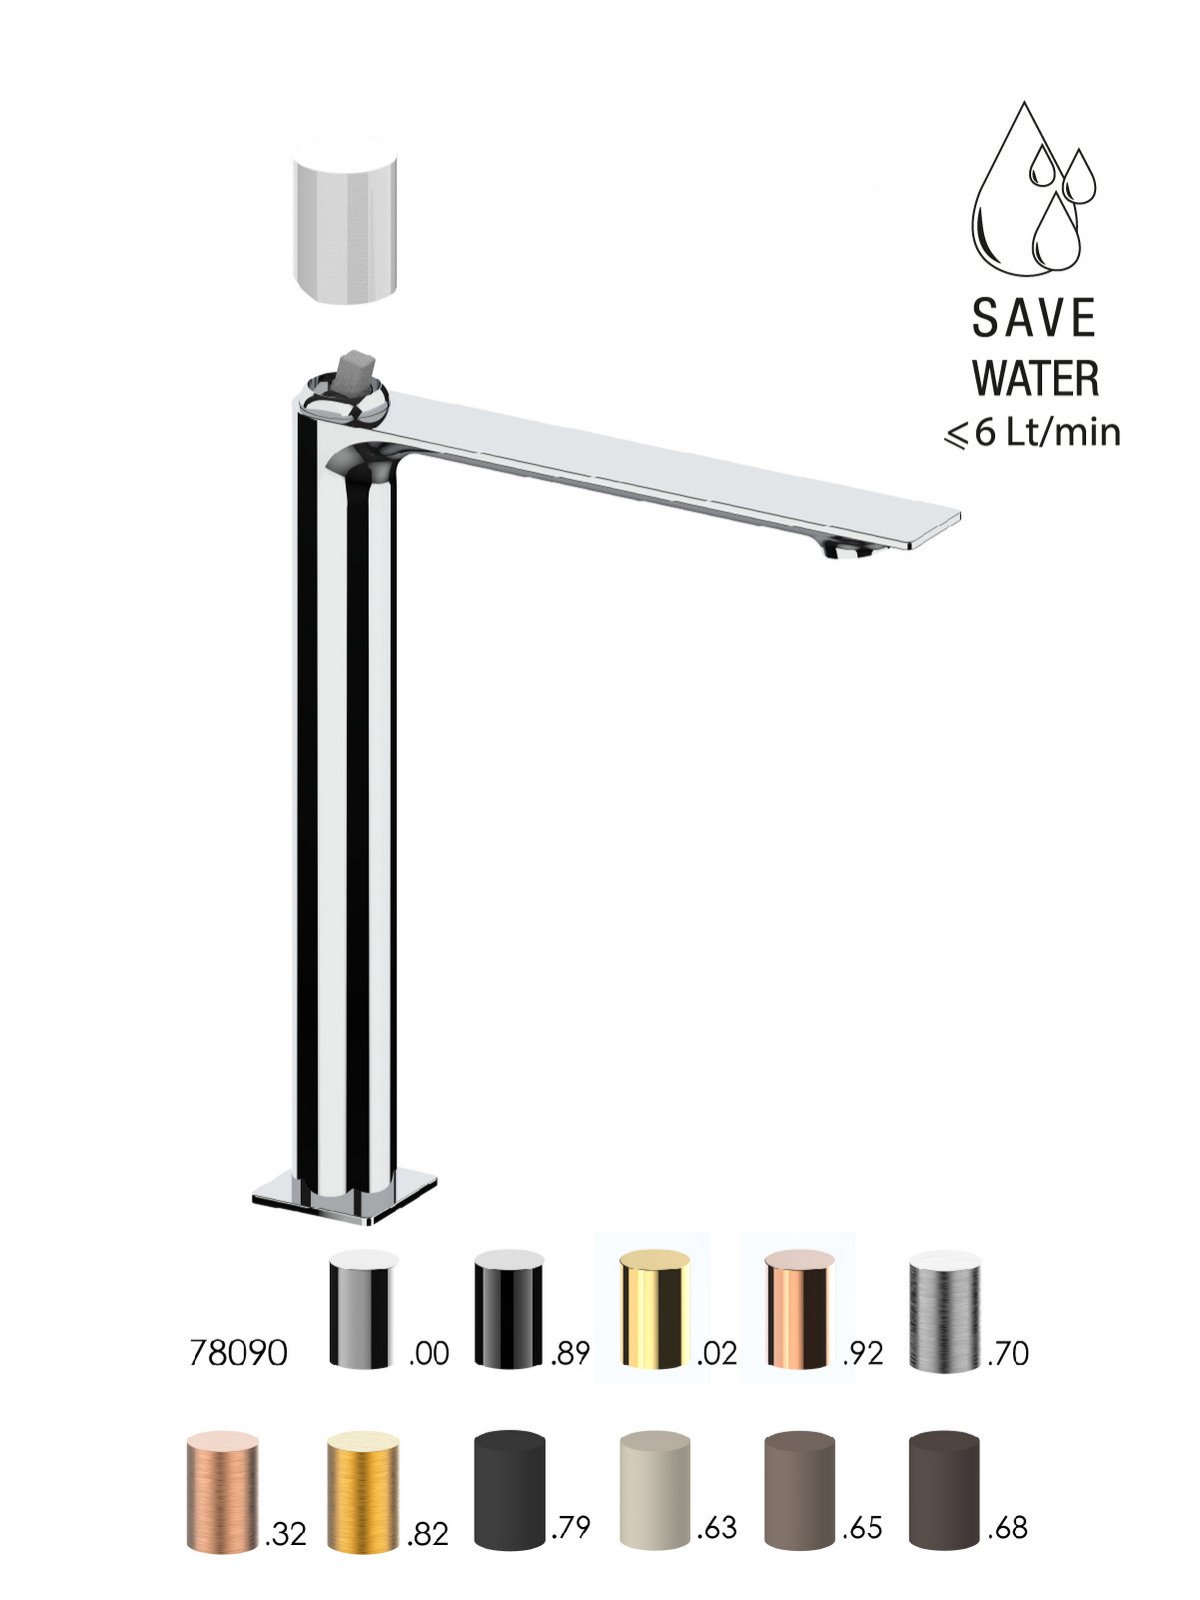 High version single-lever washbasin mixer without waste